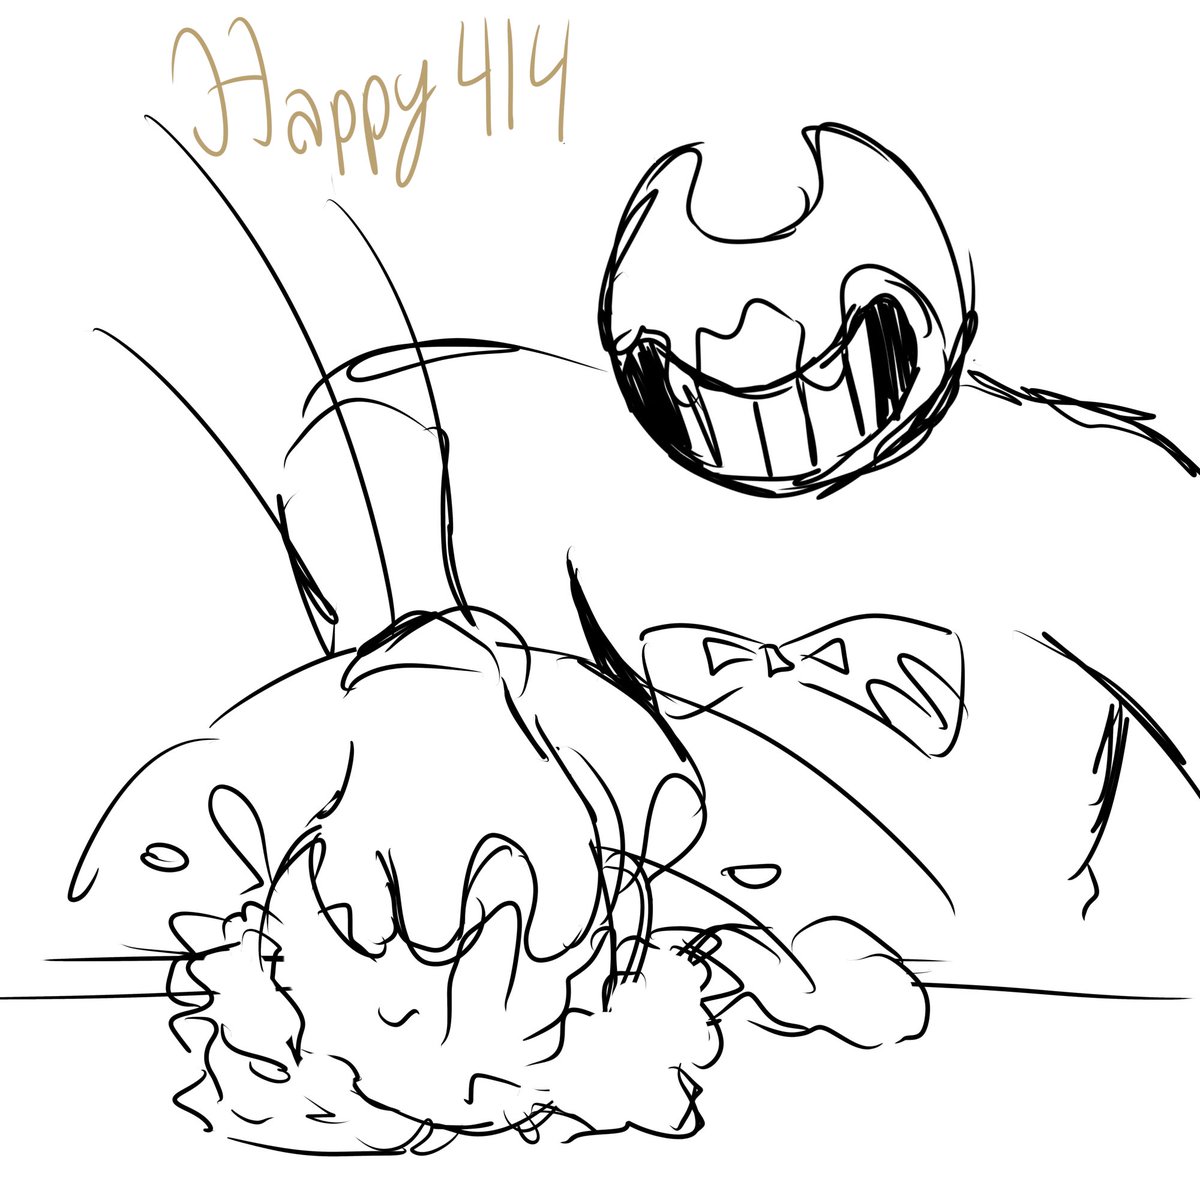 a very lazy doodle for a VERY HAPPY 414 !!